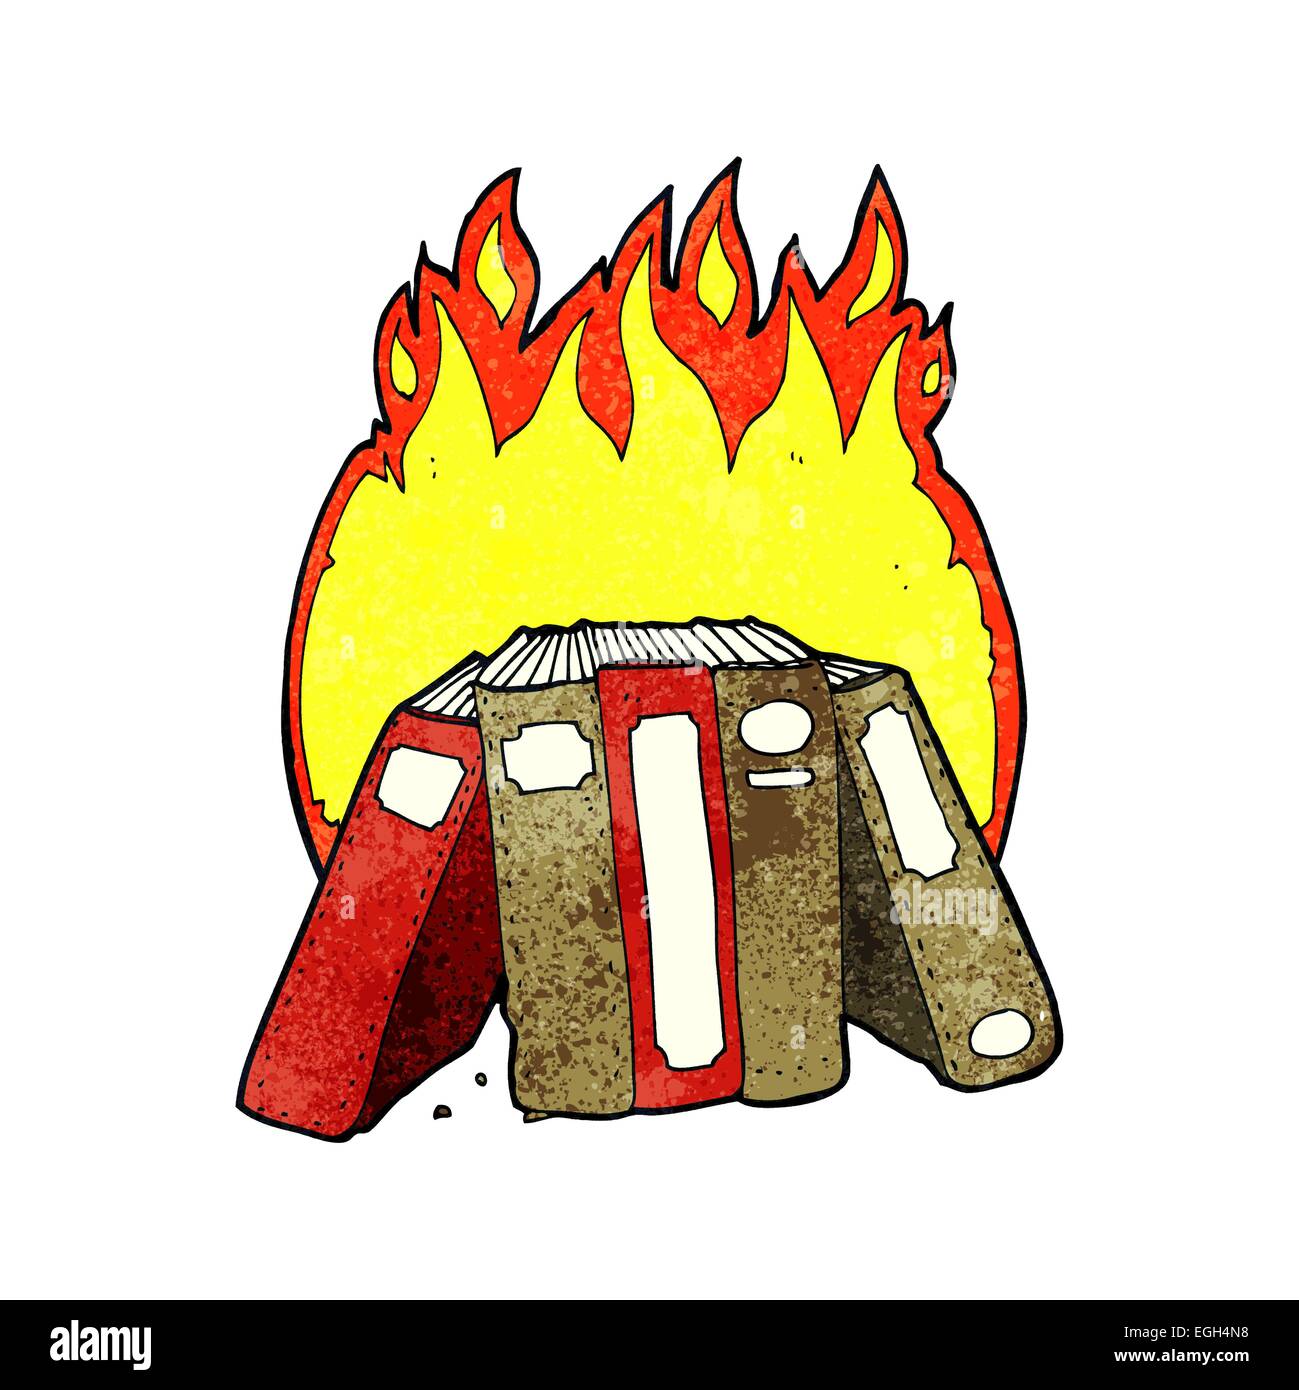 Burning of books Stock Vector Images - Alamy